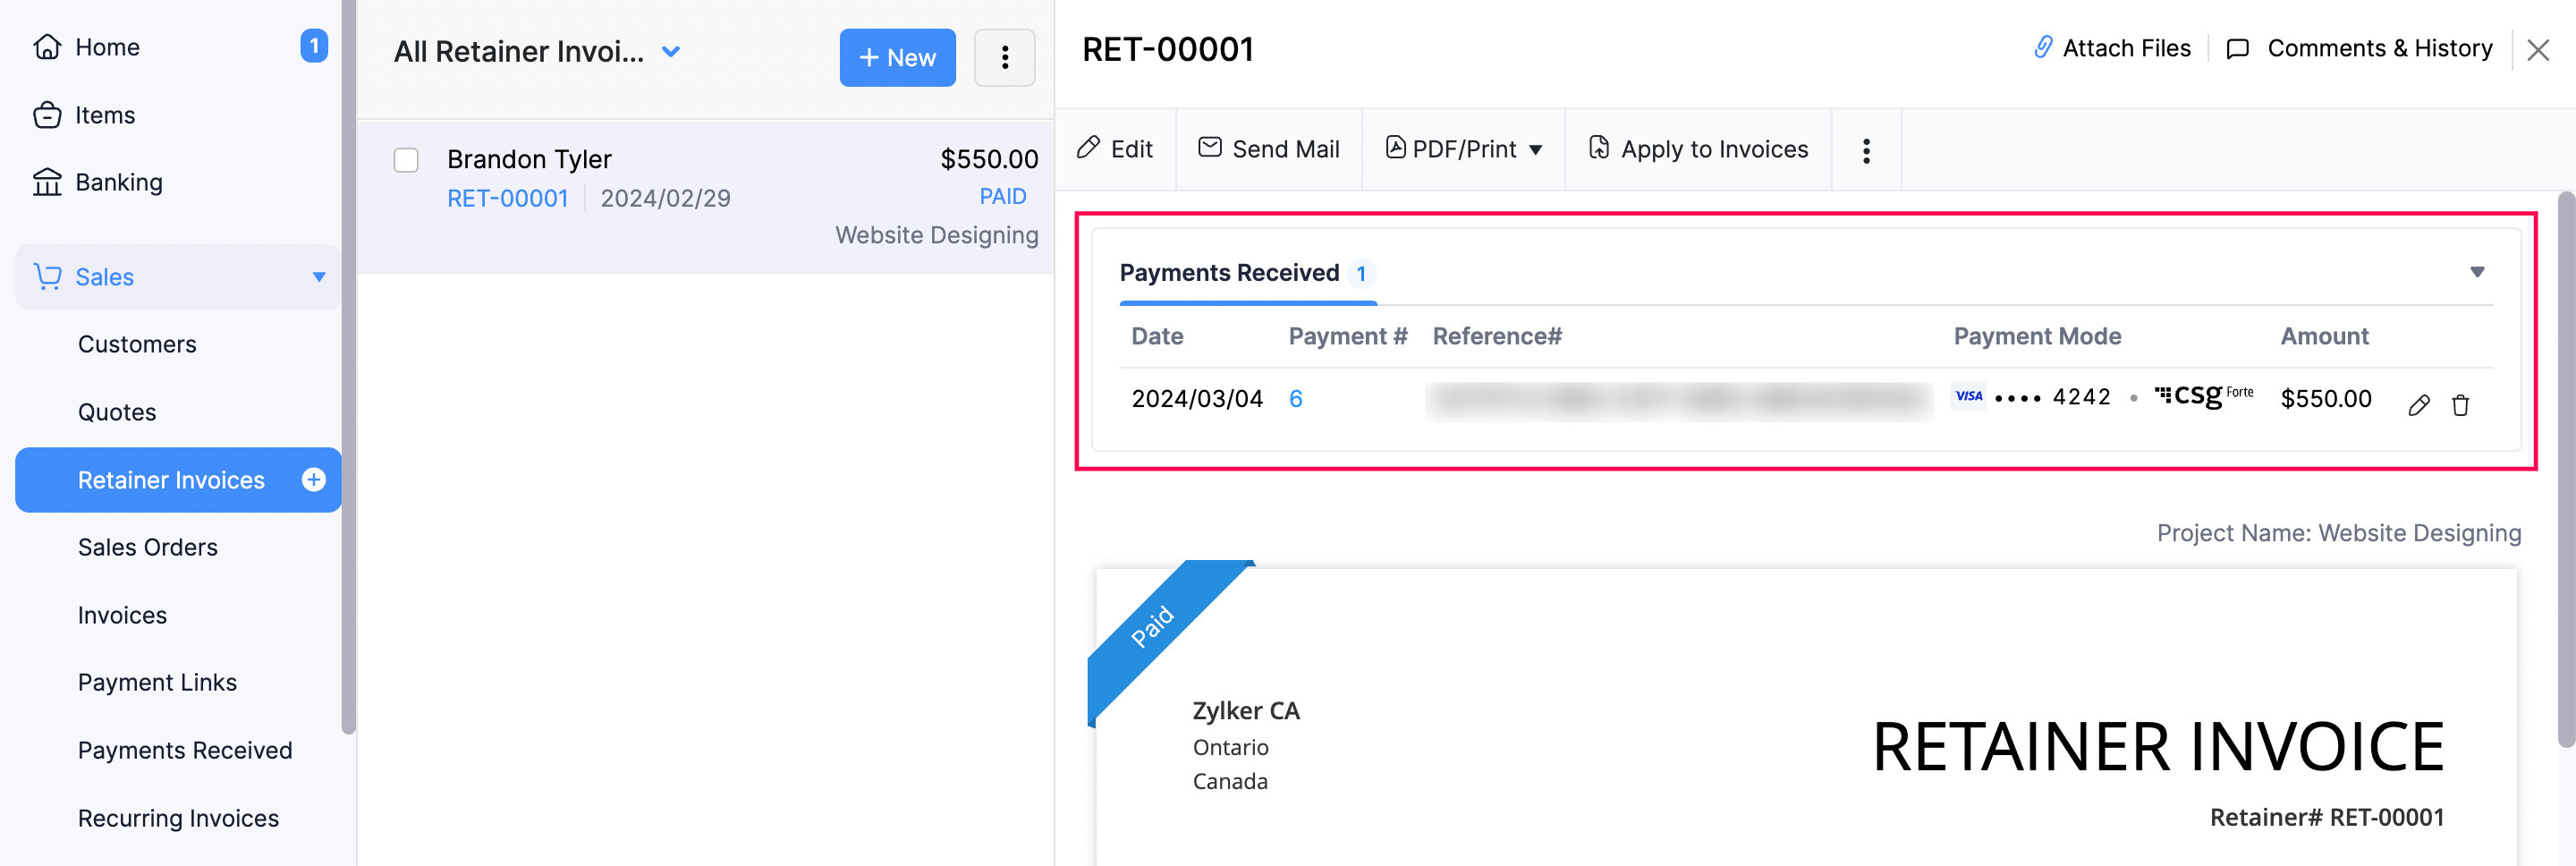 Payments Received section within a retainer invoice in Zoho Books